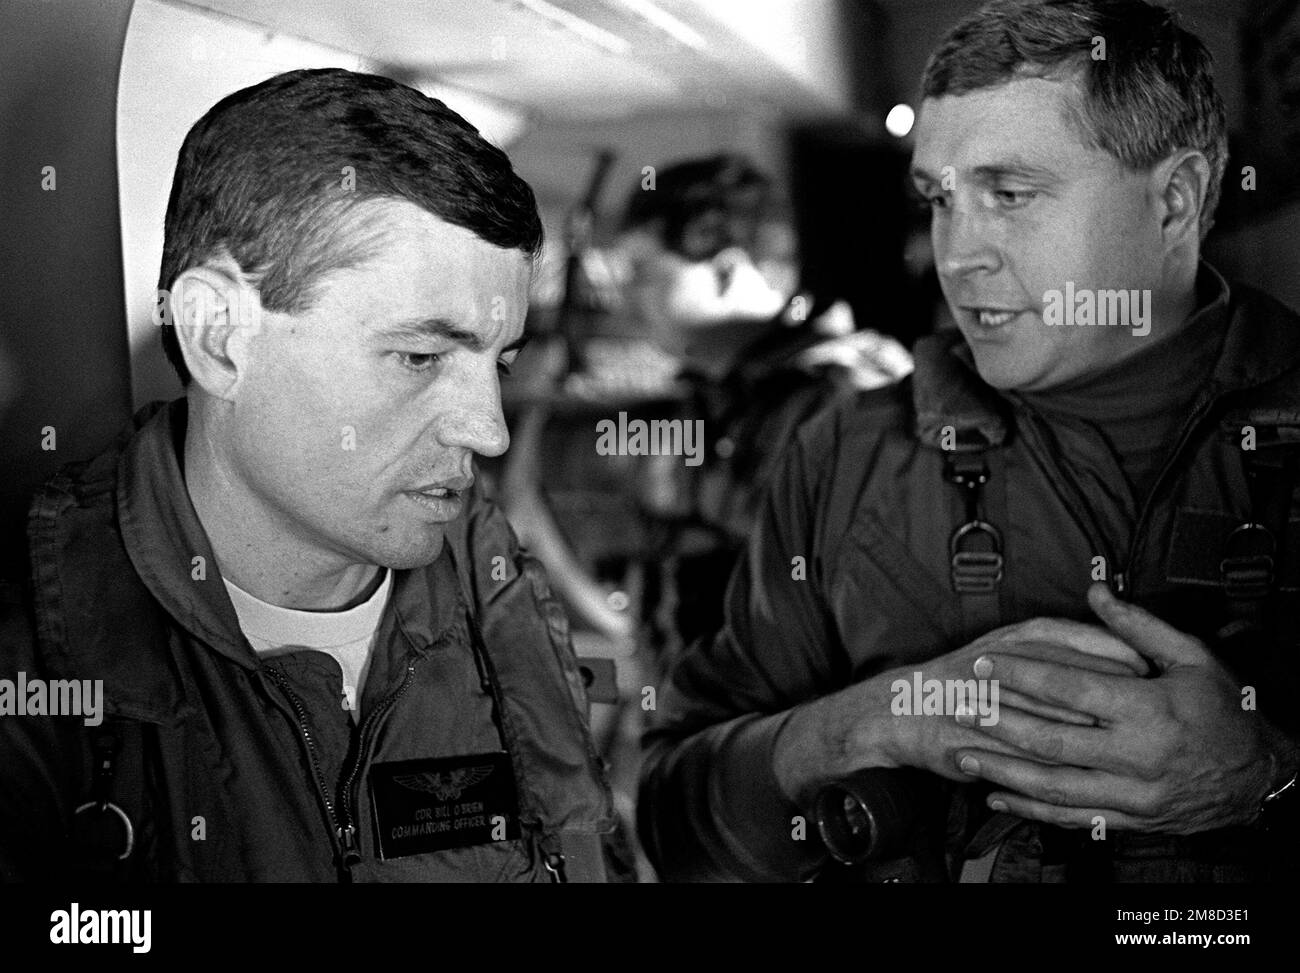 Commander Bill O'Brien, commanding officer of Naval Air Reserve Patrol Squadron 66 (VP-66), listens to a member of his squadron while inside a P-3 Orion aircraft on an active duty training mission. Country: Atlantic Ocean (AOC) Stock Photo